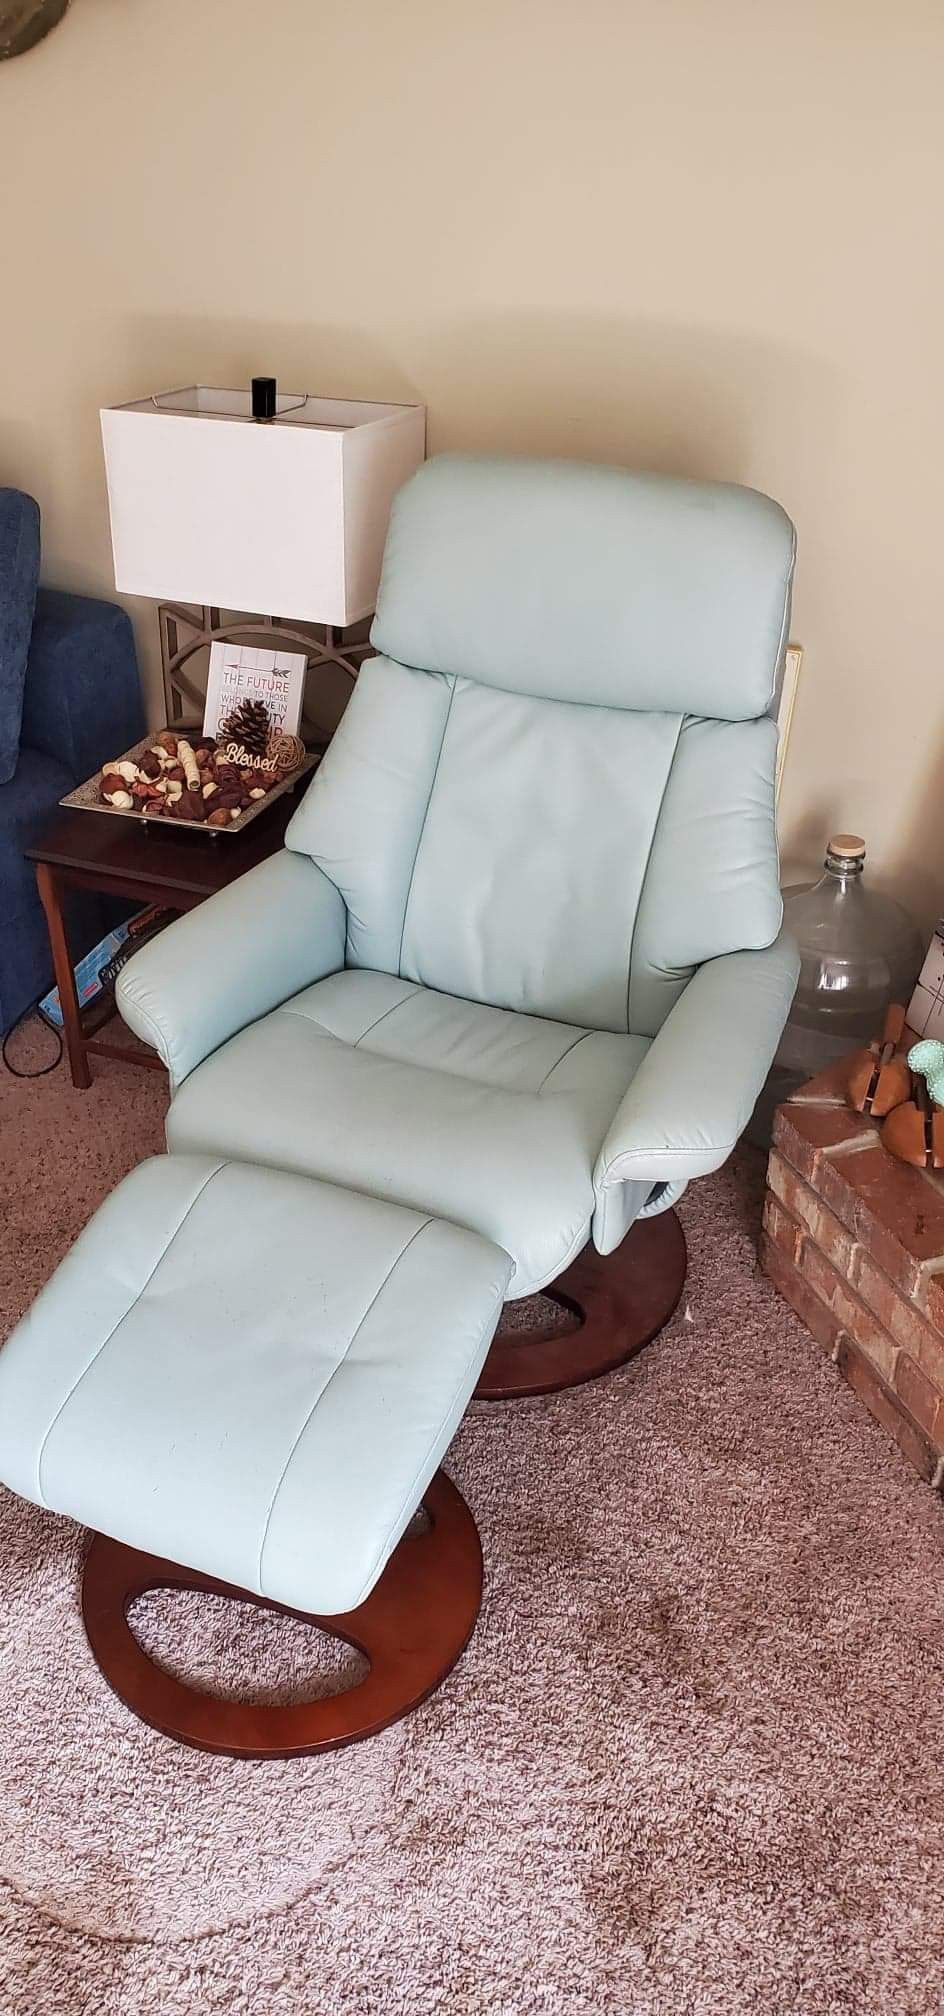 Amazing leather recliner and ottoman.. chair swivels too!!! Beautiful color!!!